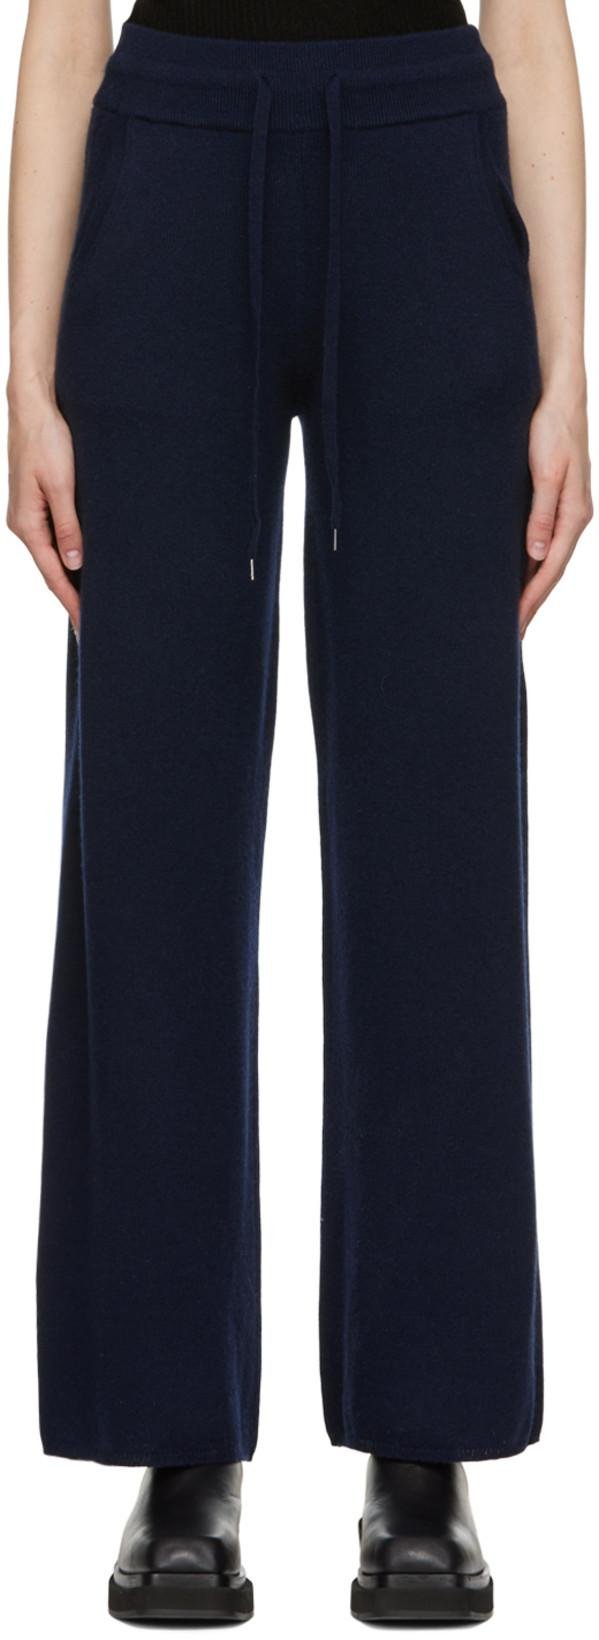 Navy Erica Lounge Pants by 360 CASHMERE